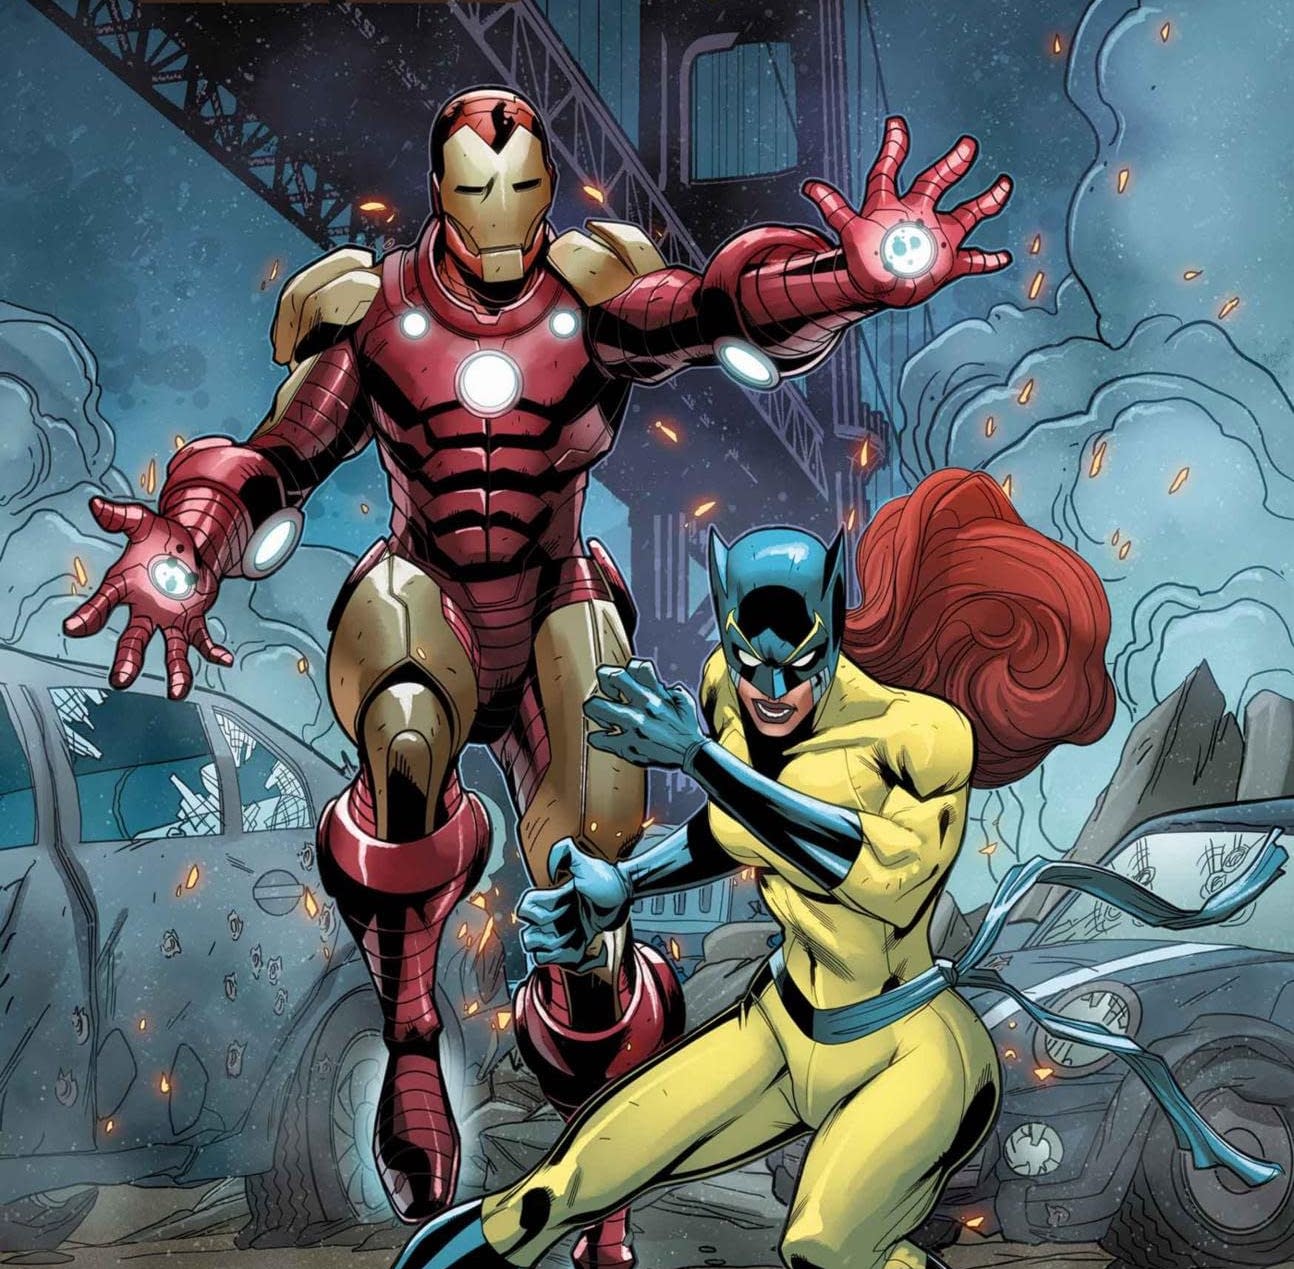 'Iron Man/Hellcat Annual' #1 further fleshes out Trish Walker